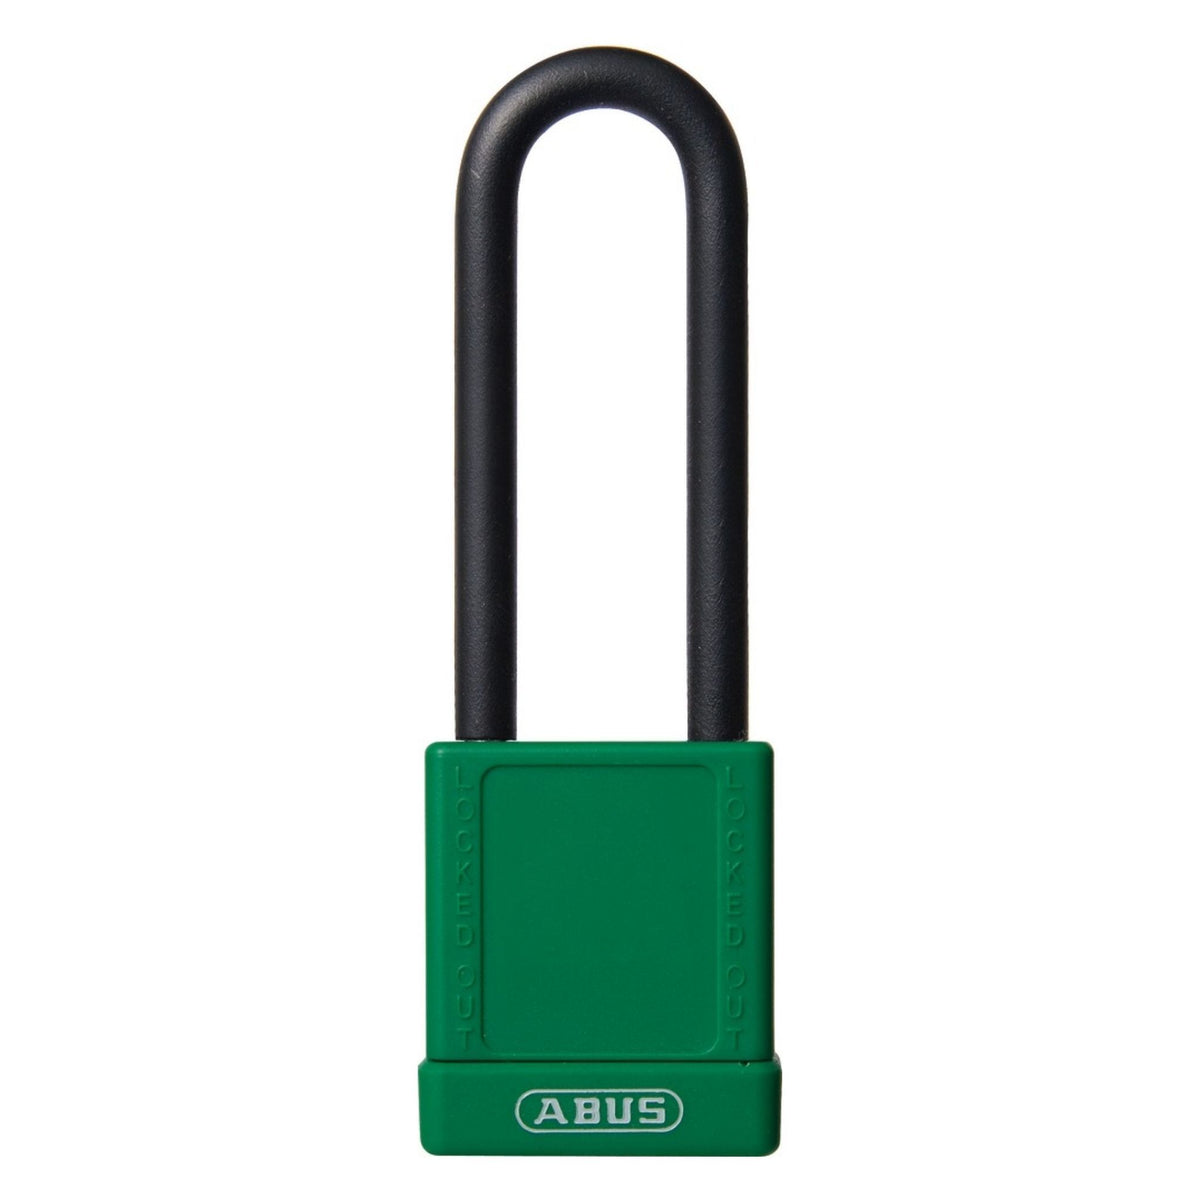 Abus 74/40HB75 KD Keyed Different Green Safety Padlock, 3-Inch Shackle - The Lock Source